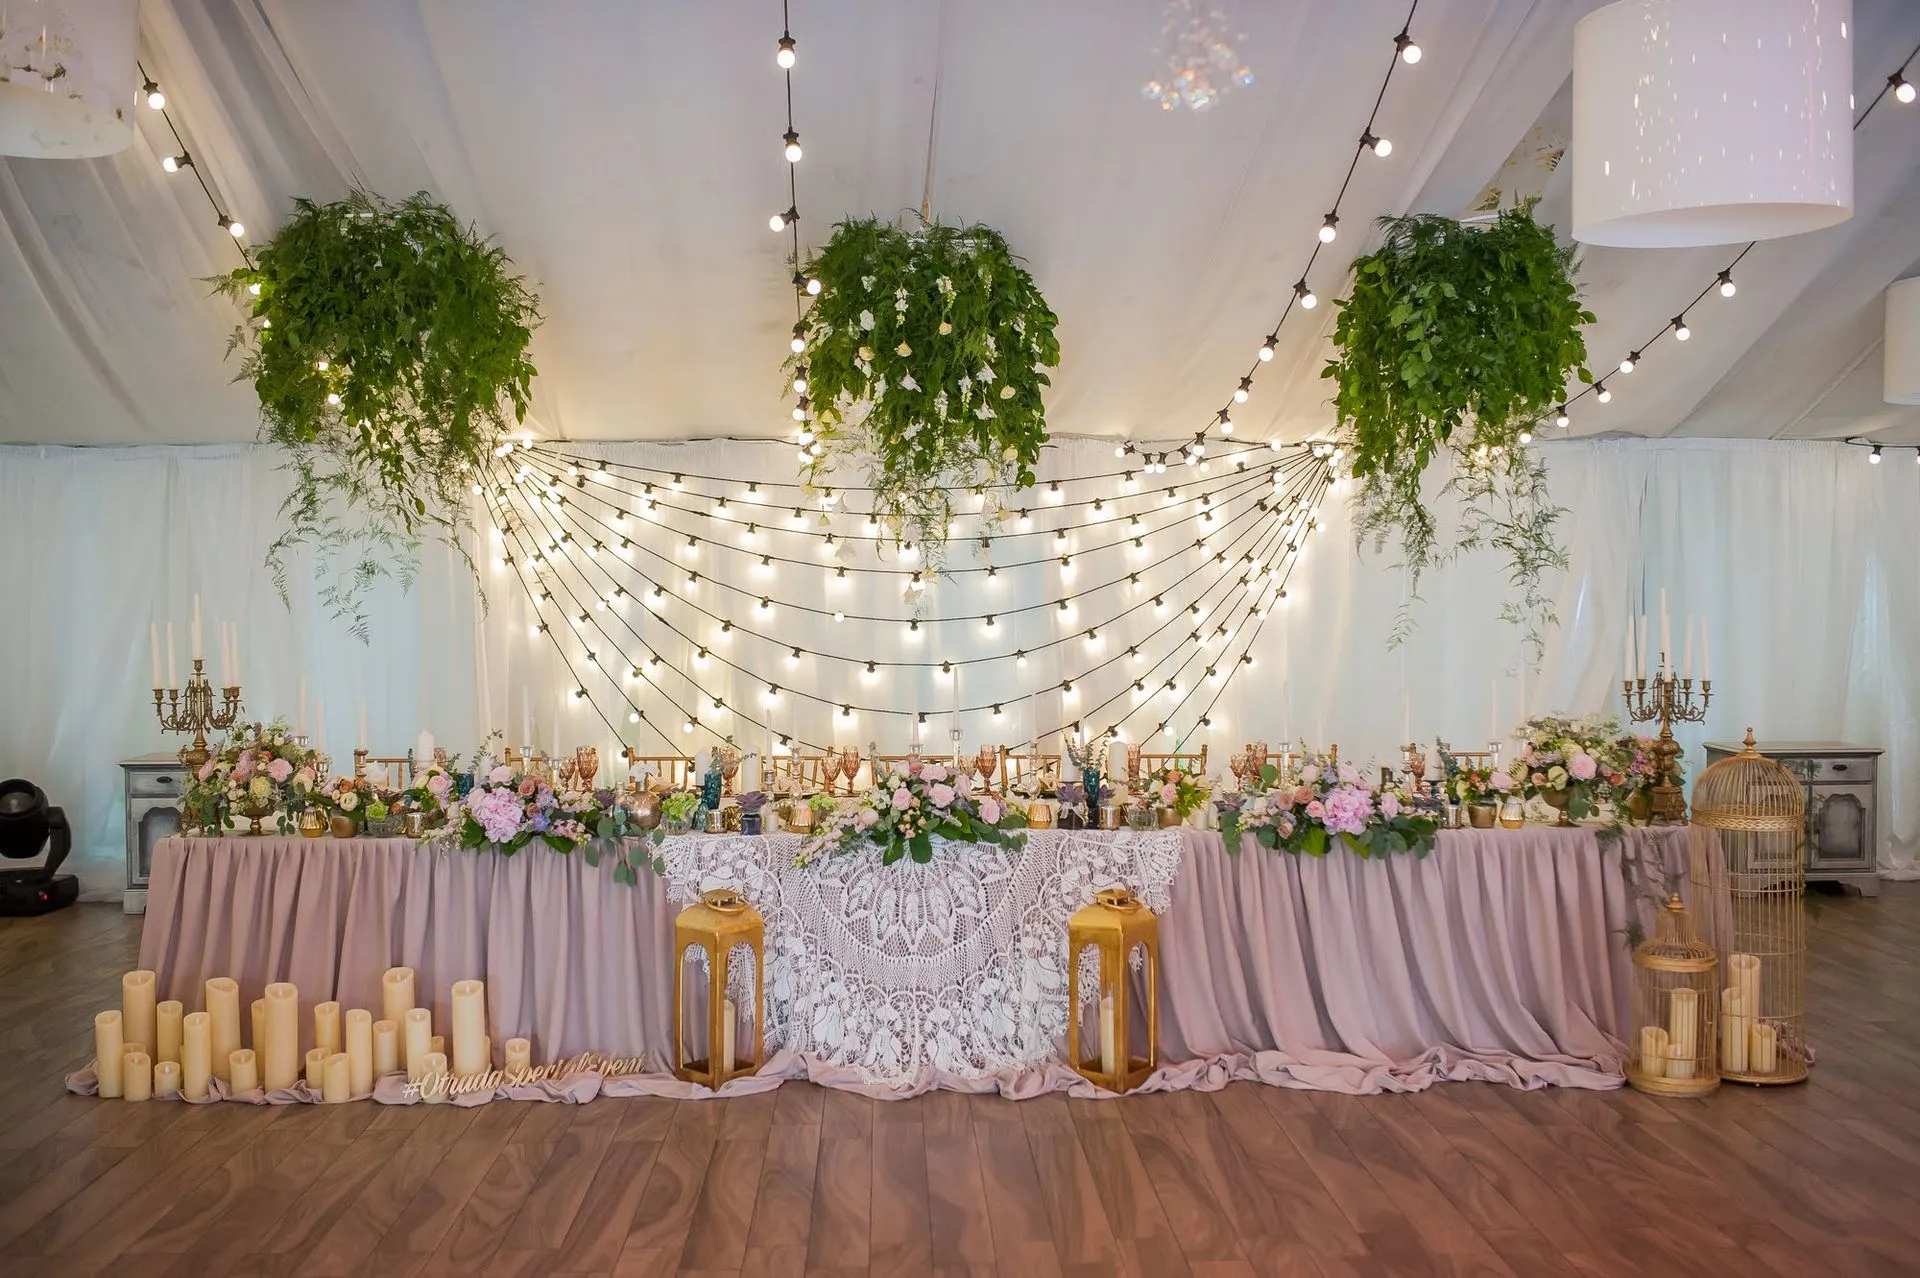 5 Surprising Ceremony Backdrops To Frame Your Nuptials